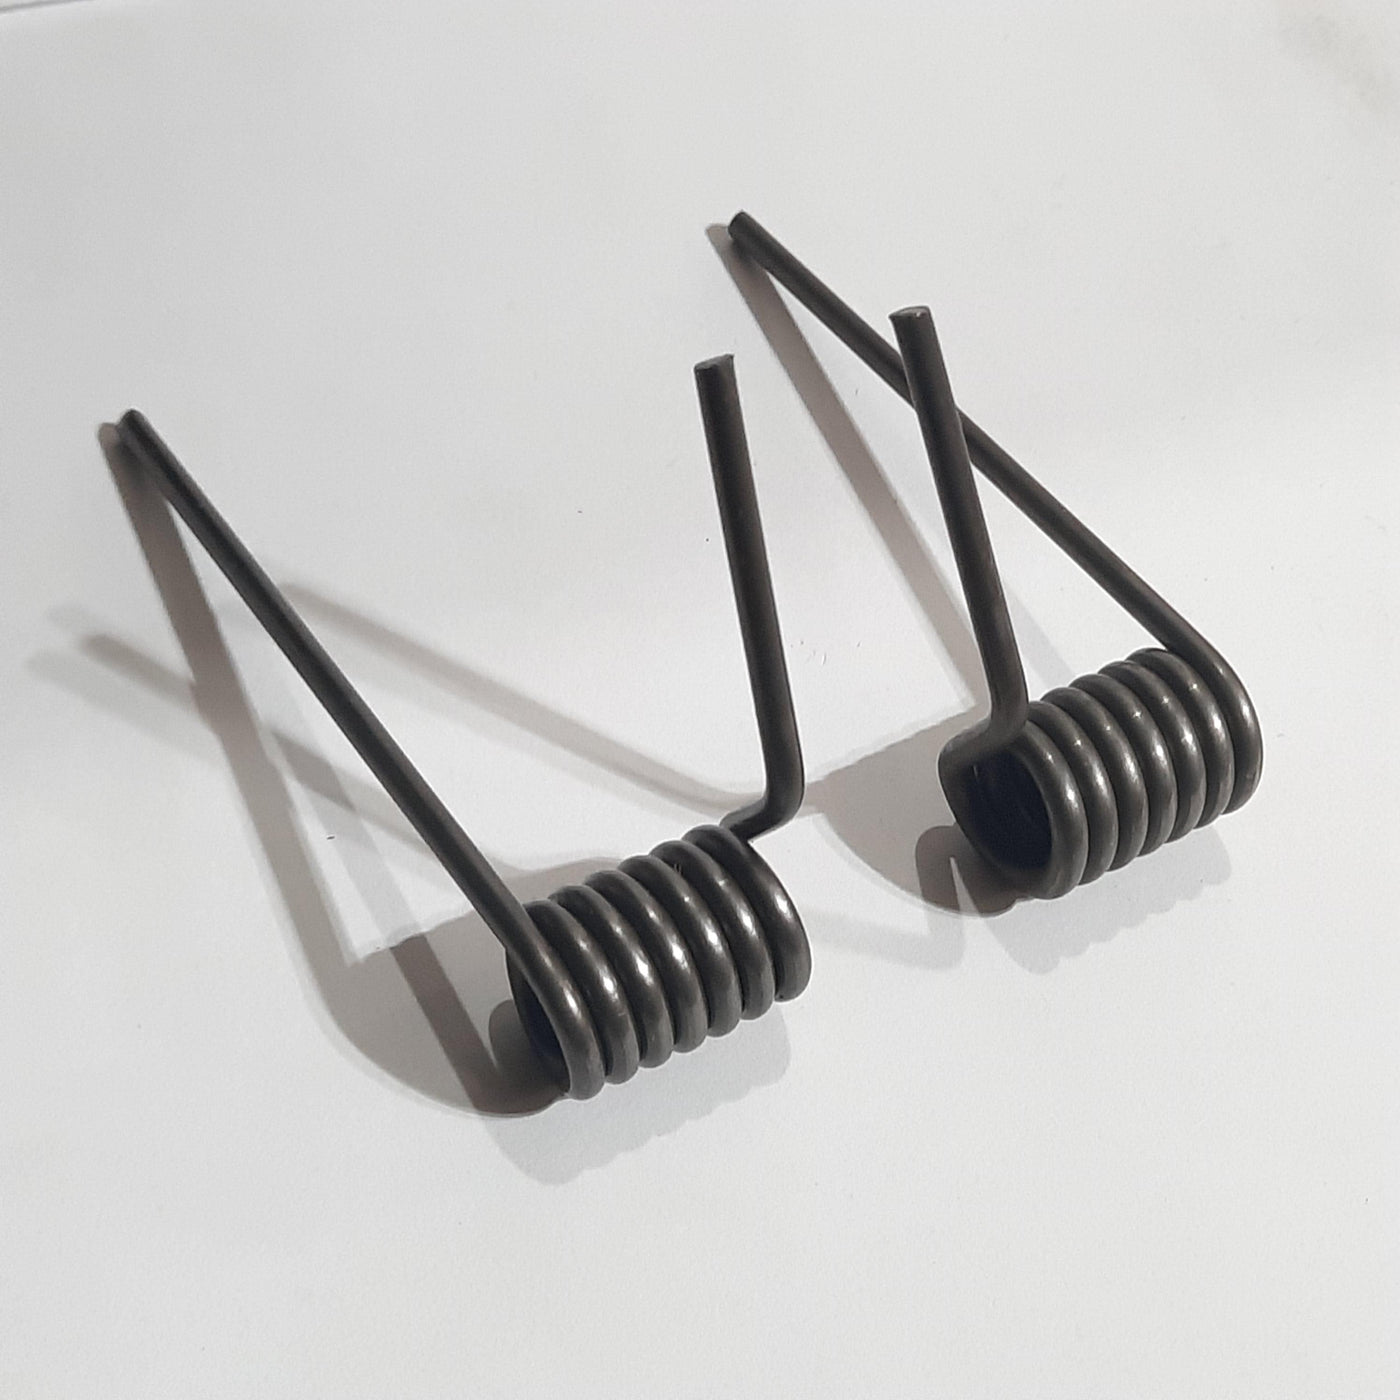 Replacement 4-Coil Springs for Bridger and MB - Trapping Supplies